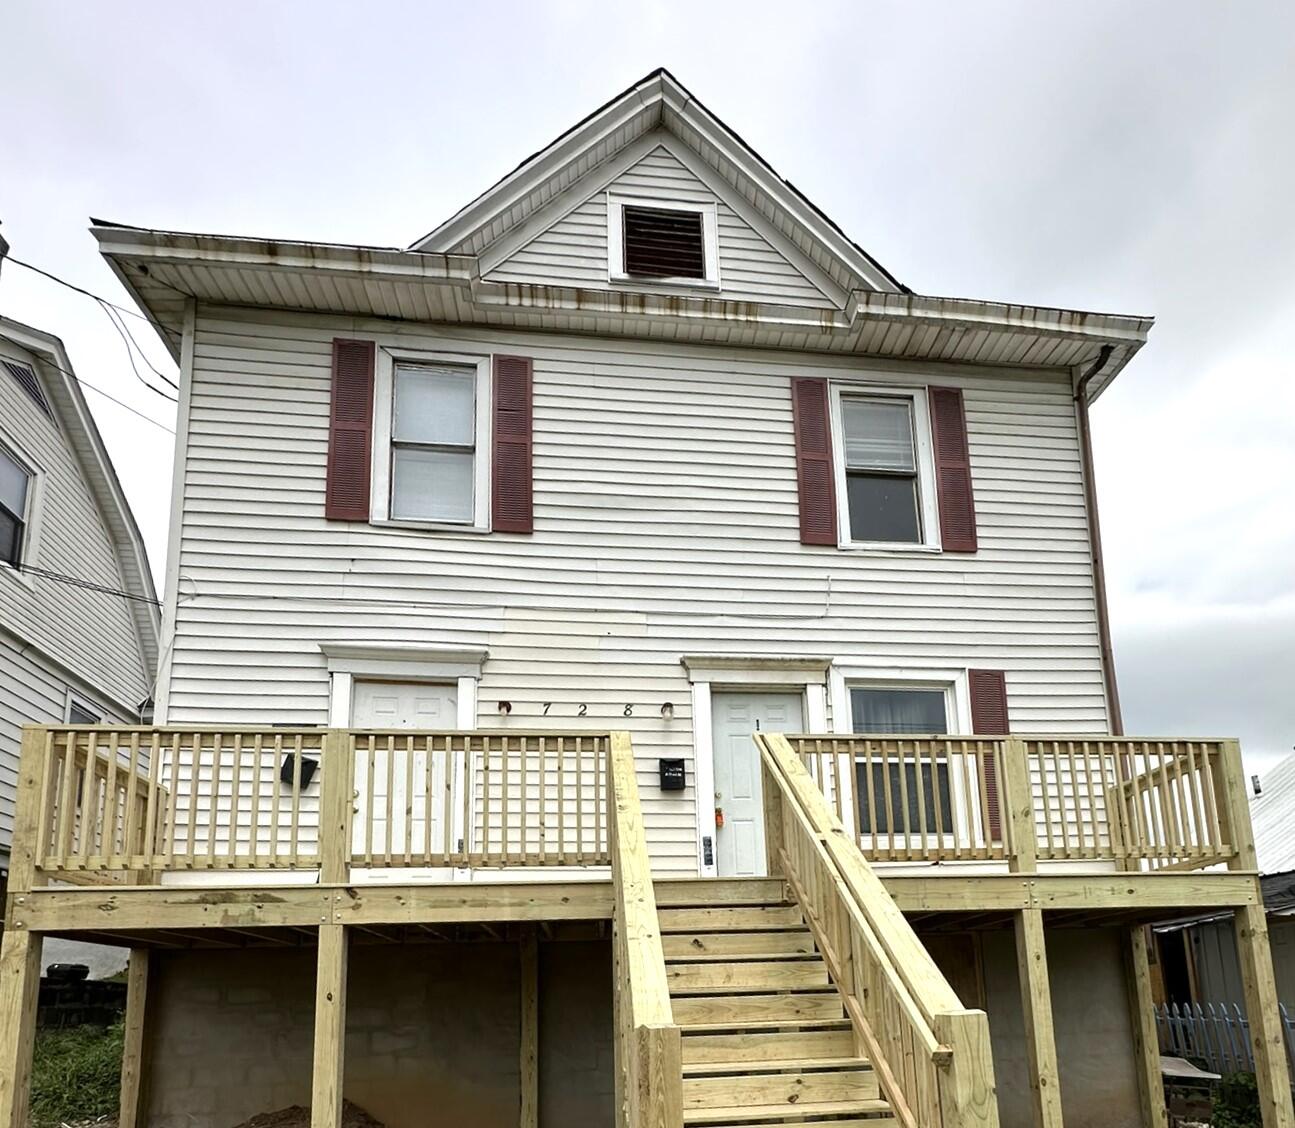 a view of a house with wooden deck